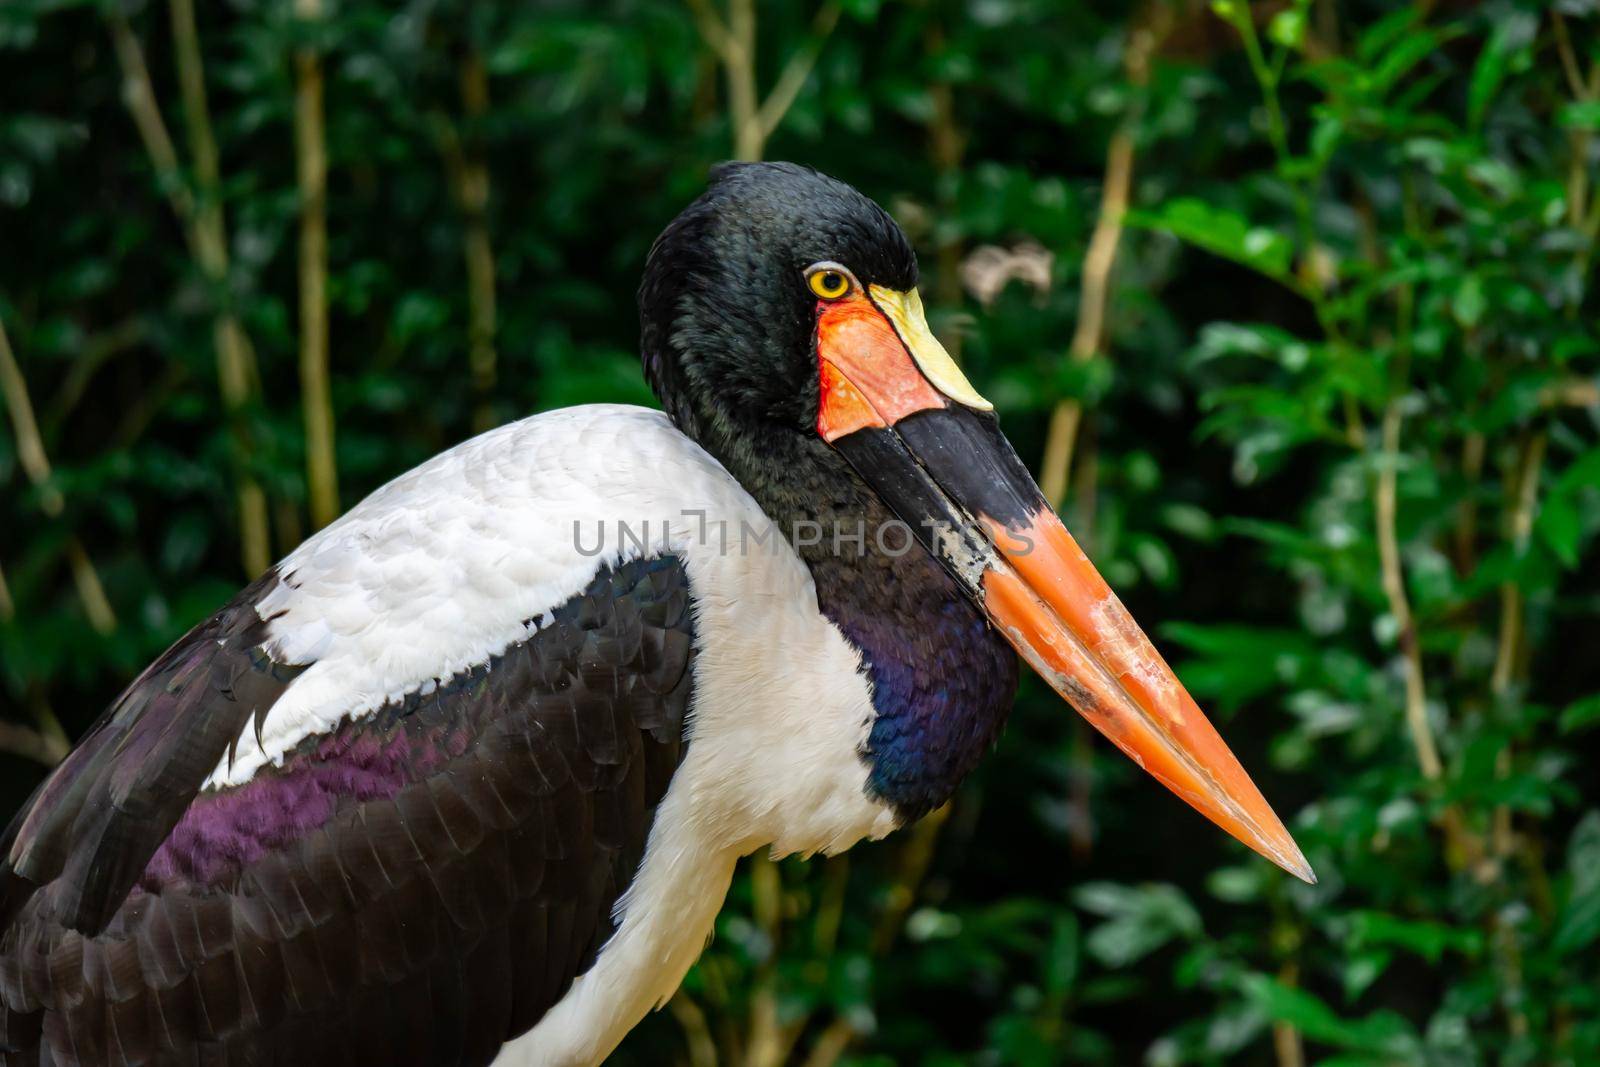 Closeup shot of a Saddle billed stork Ephippiorhynchus senegalensis on a zoo in Singapore by billroque